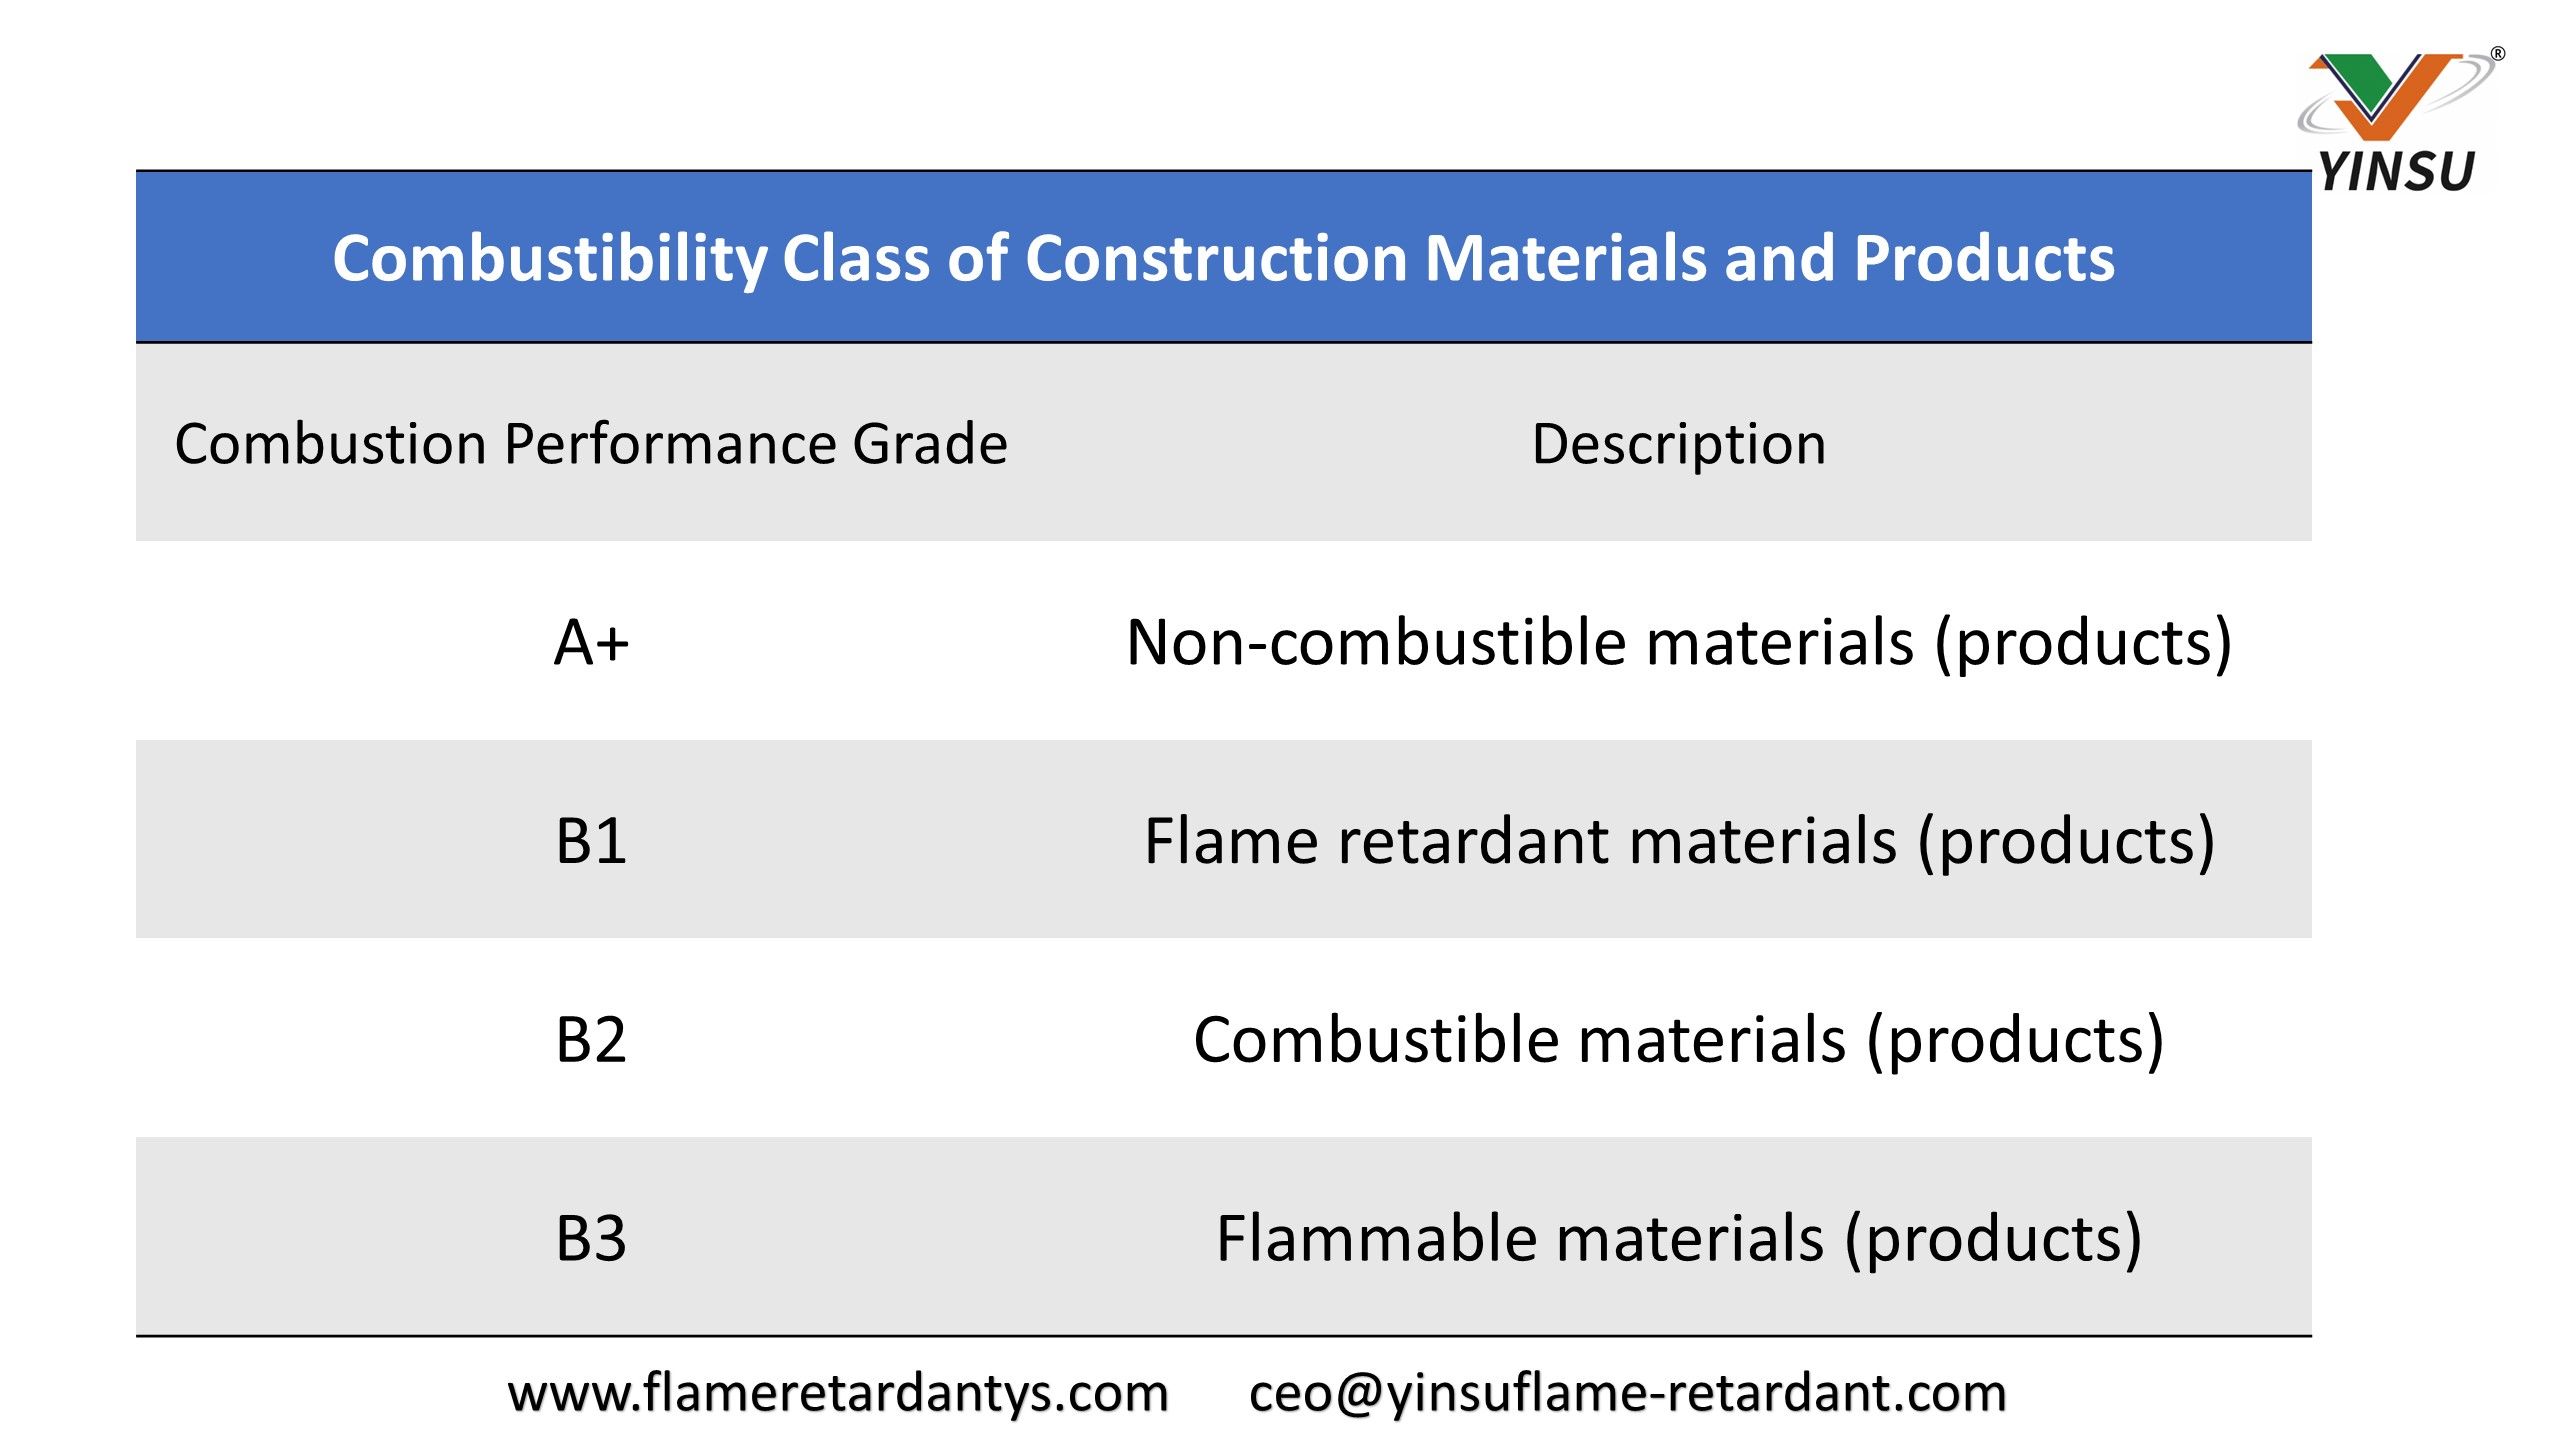 8.13 Combustibility Class of Construction Materials and Products